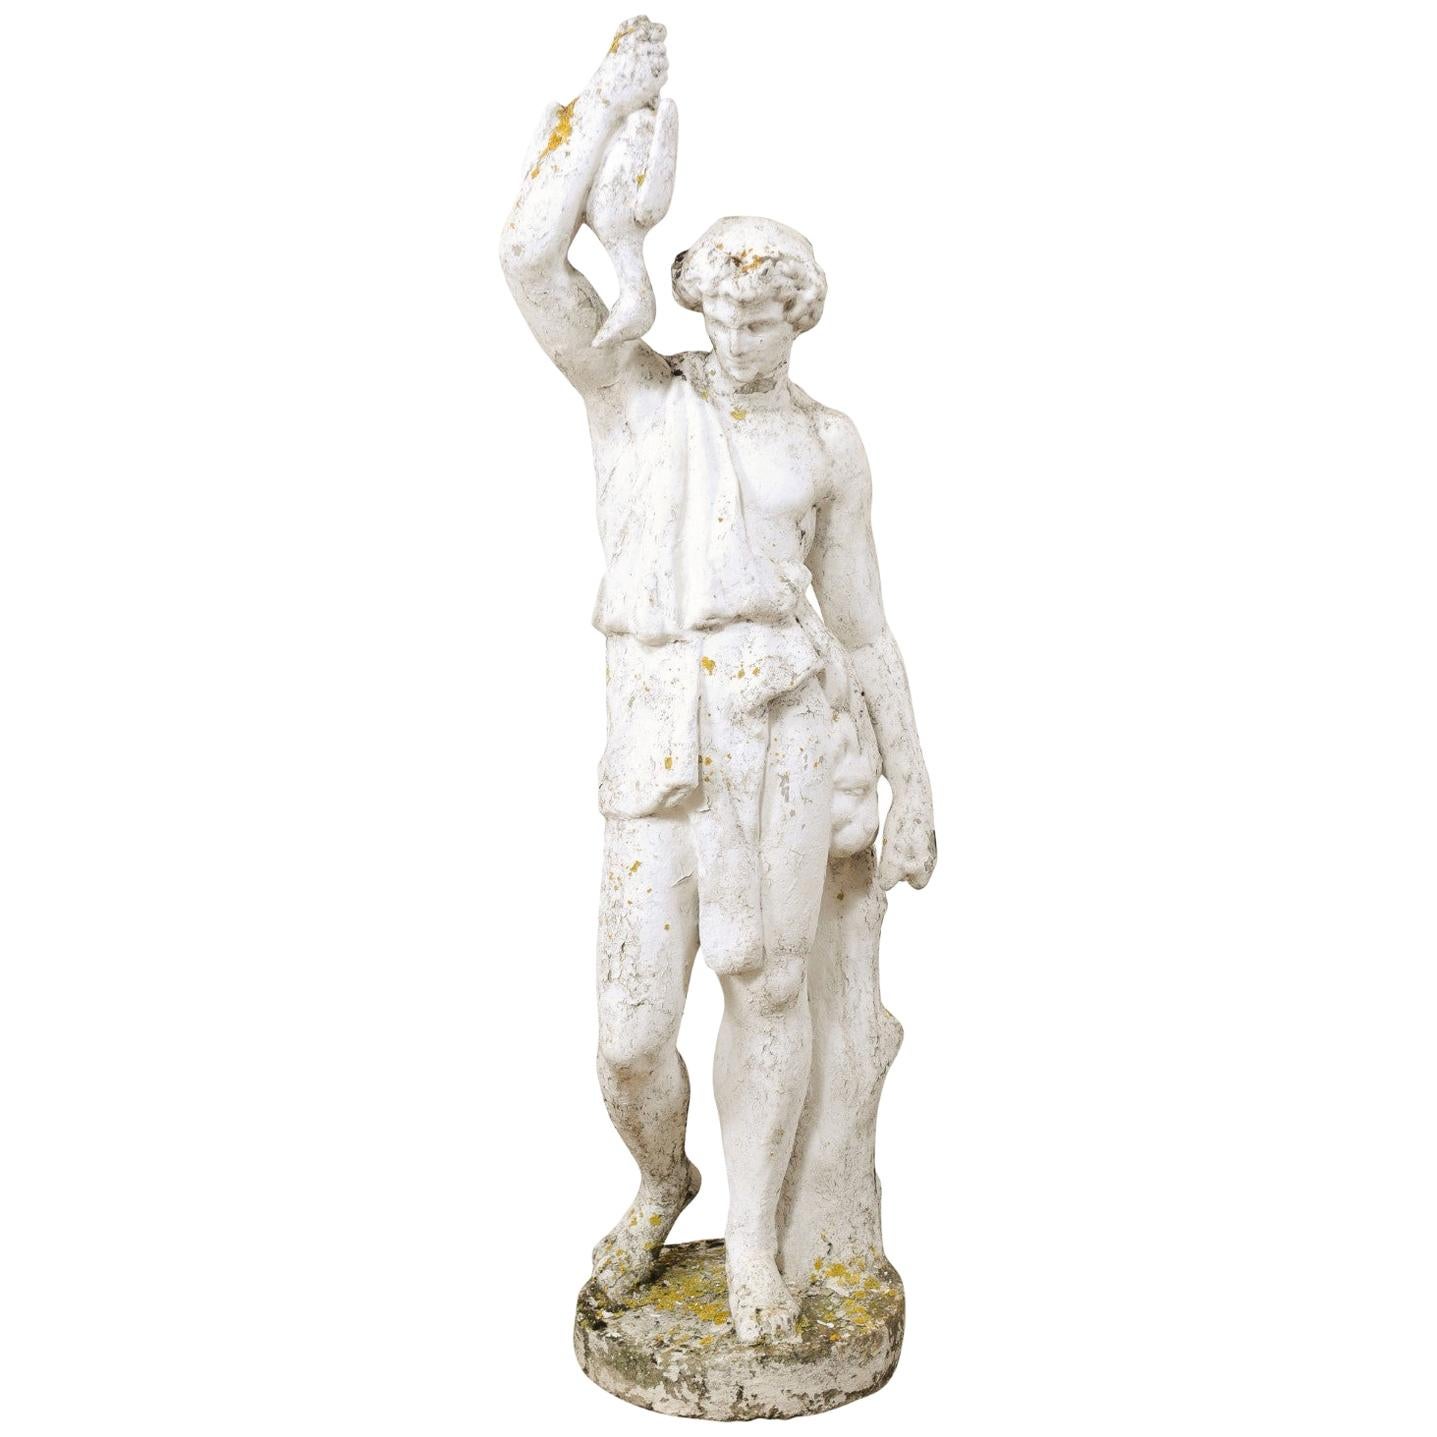 Classical Tall French Garden Sculpture of Male Figure from Early 20th Century